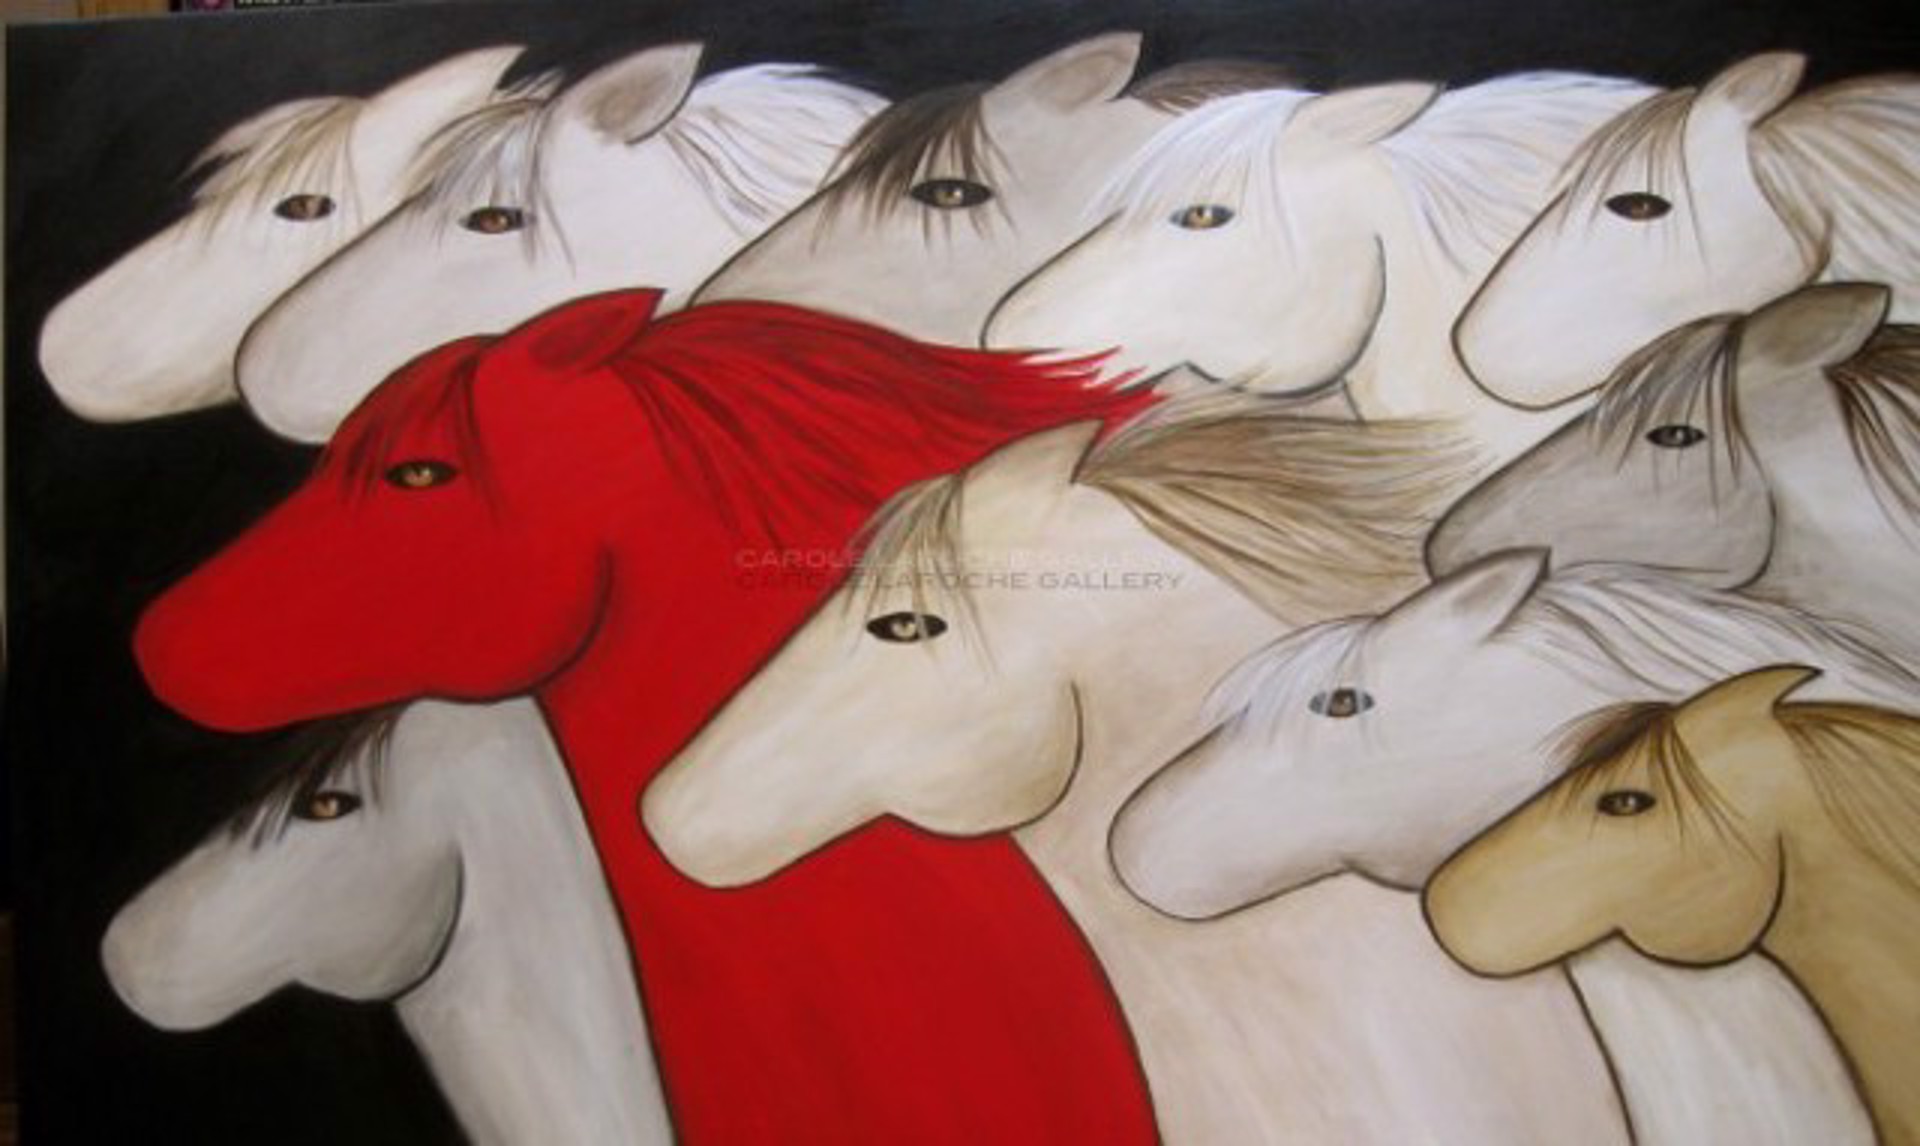 Red Pony print on canvas 20/100 by Carole LaRoche